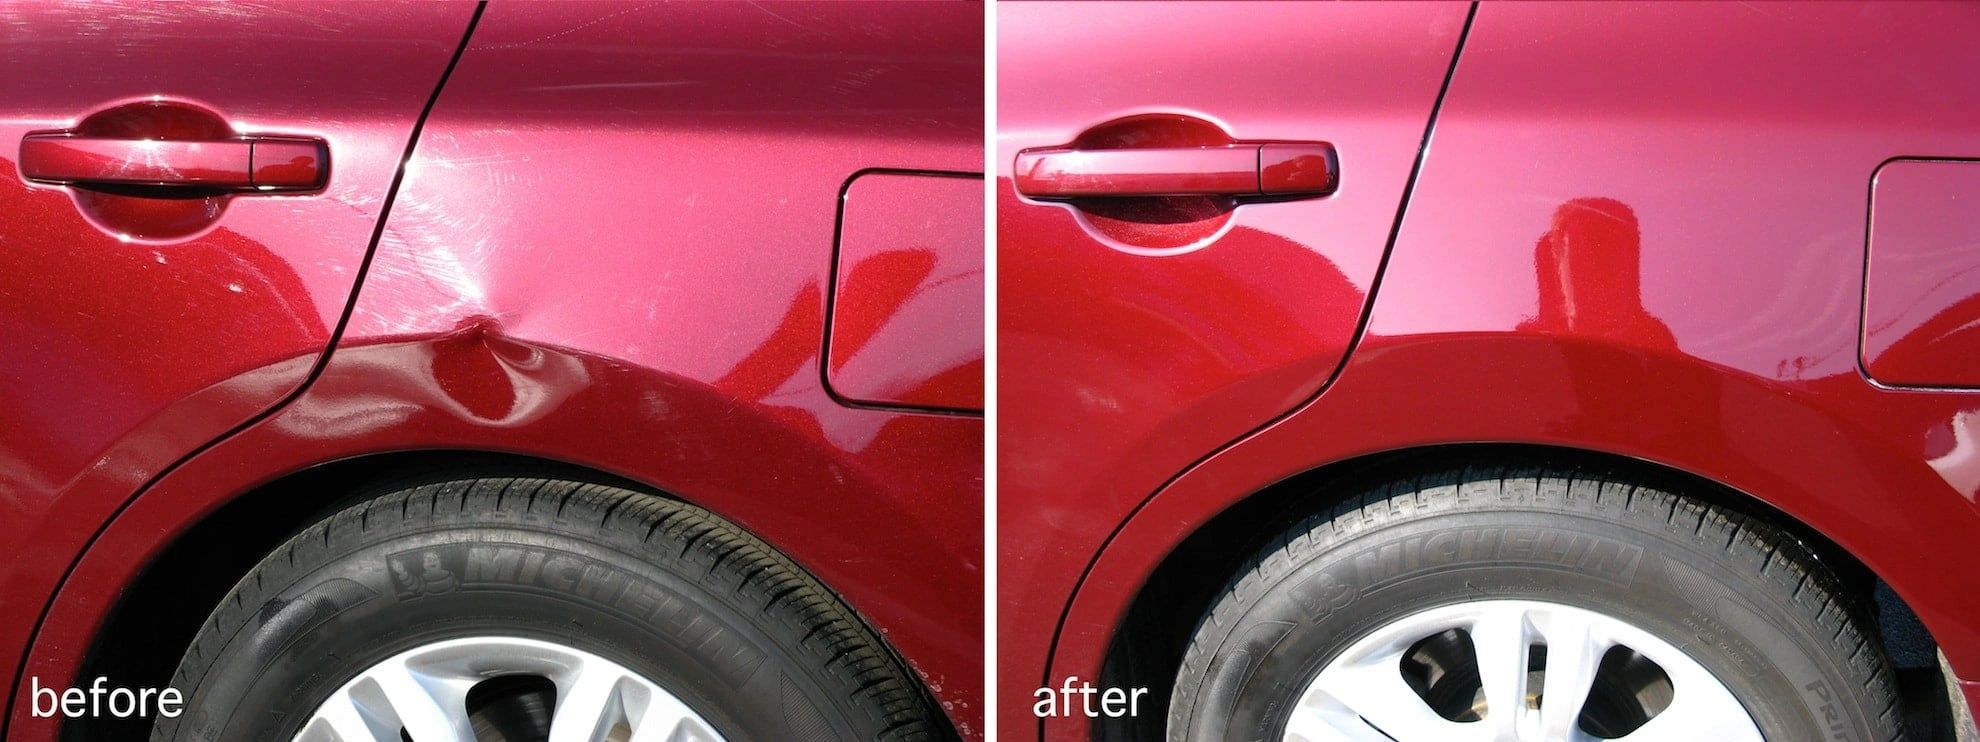 Achieving Flawless Results With Paintless Dent Repair thumbnail